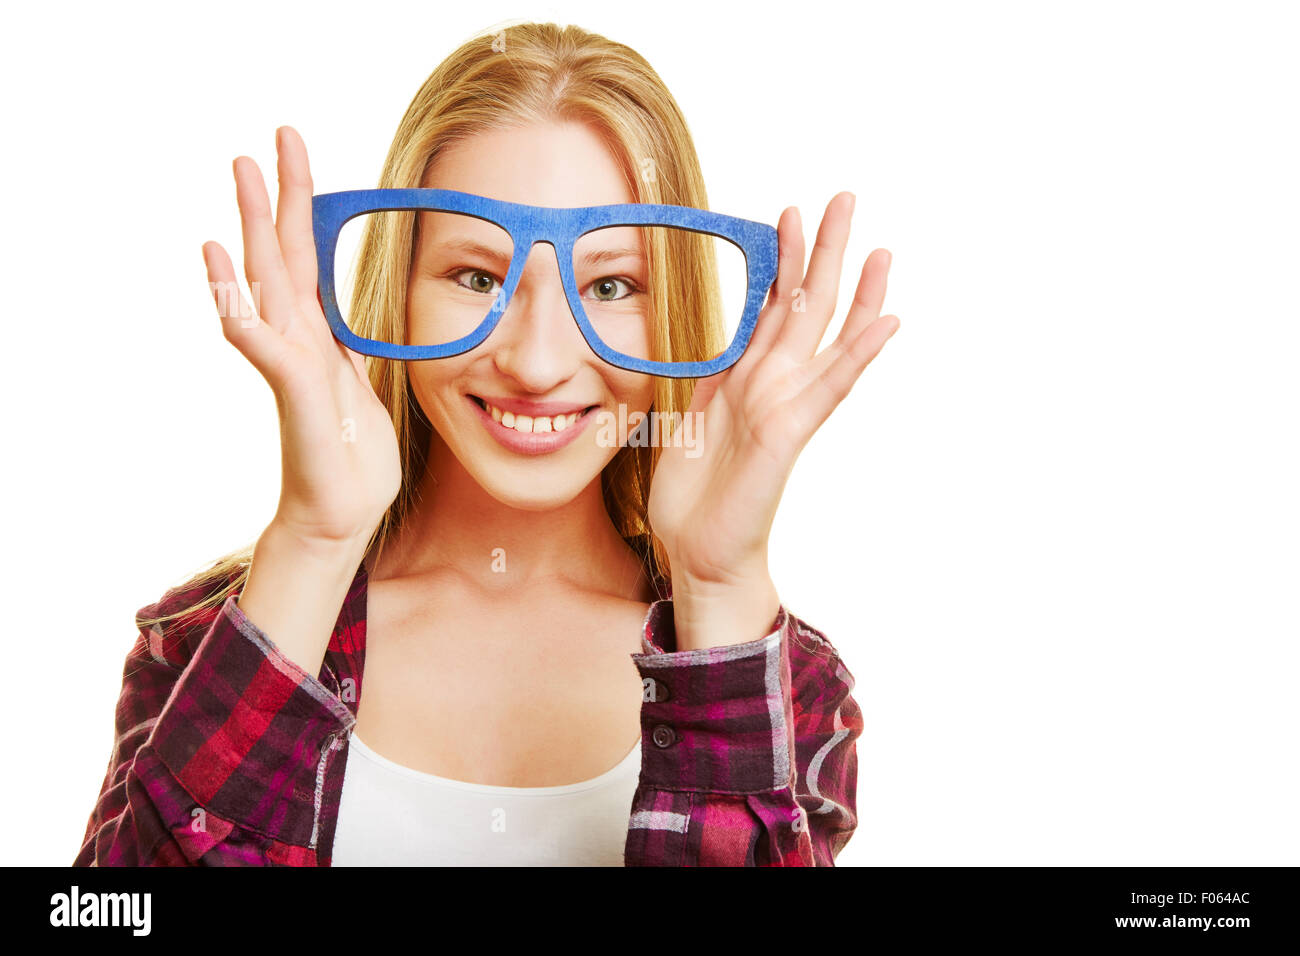 Young blonde woman holding fake nerd glasses in front of her eyes Stock Photo